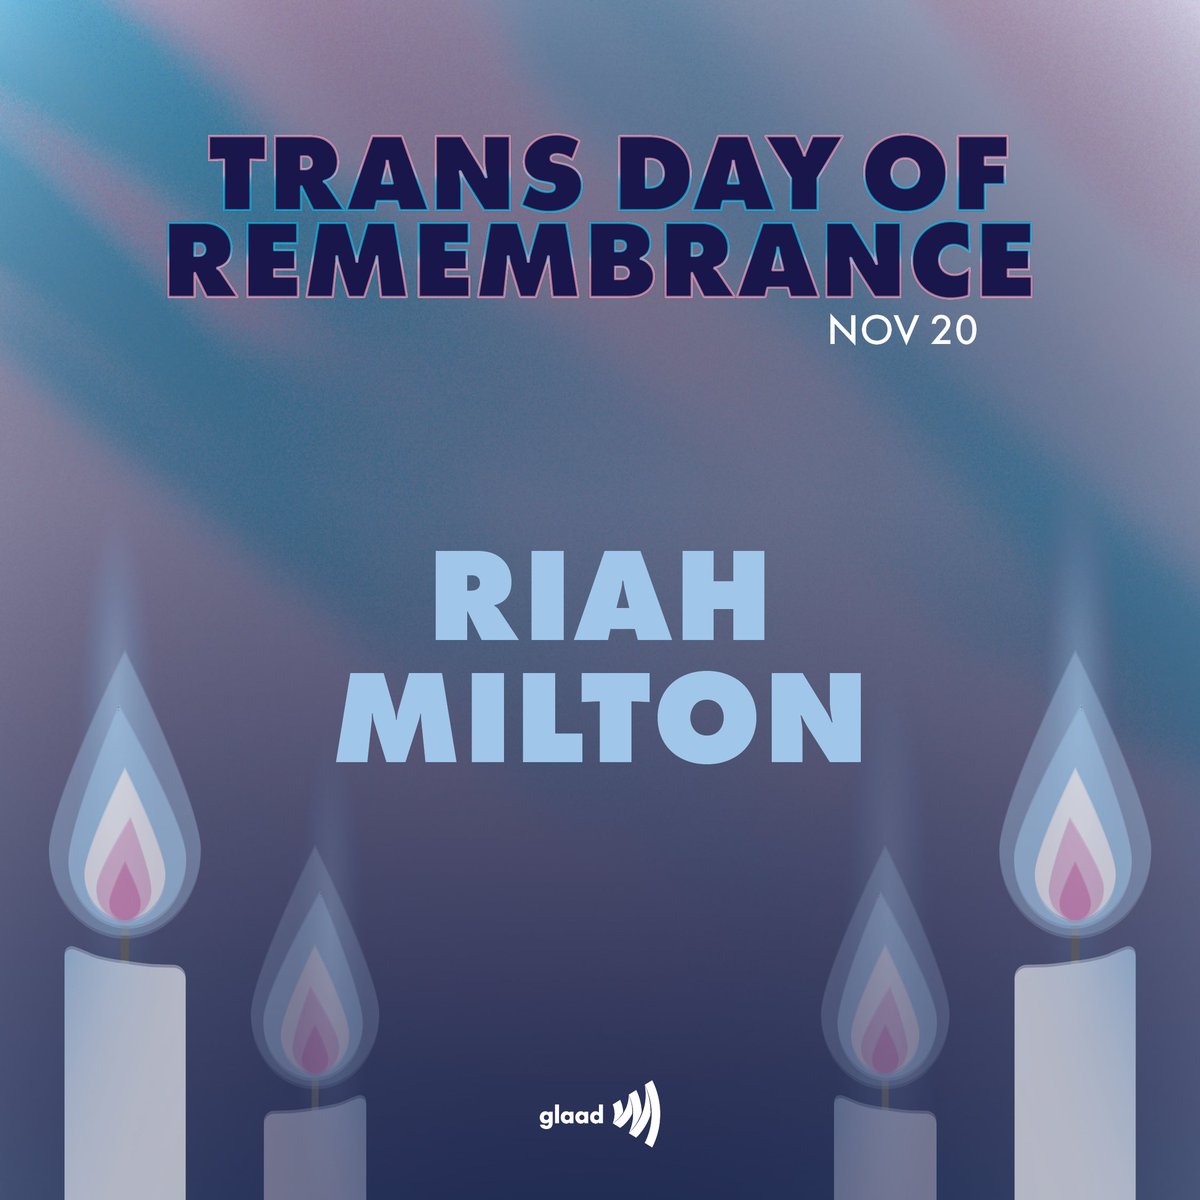 Riah Milton, a Black transgender woman, was killed in Liberty Township, Ohio on June 9, 2020. She was 25 years old. She once posted on Facebook, “Never been scared to struggle. Imma get it eventually.”